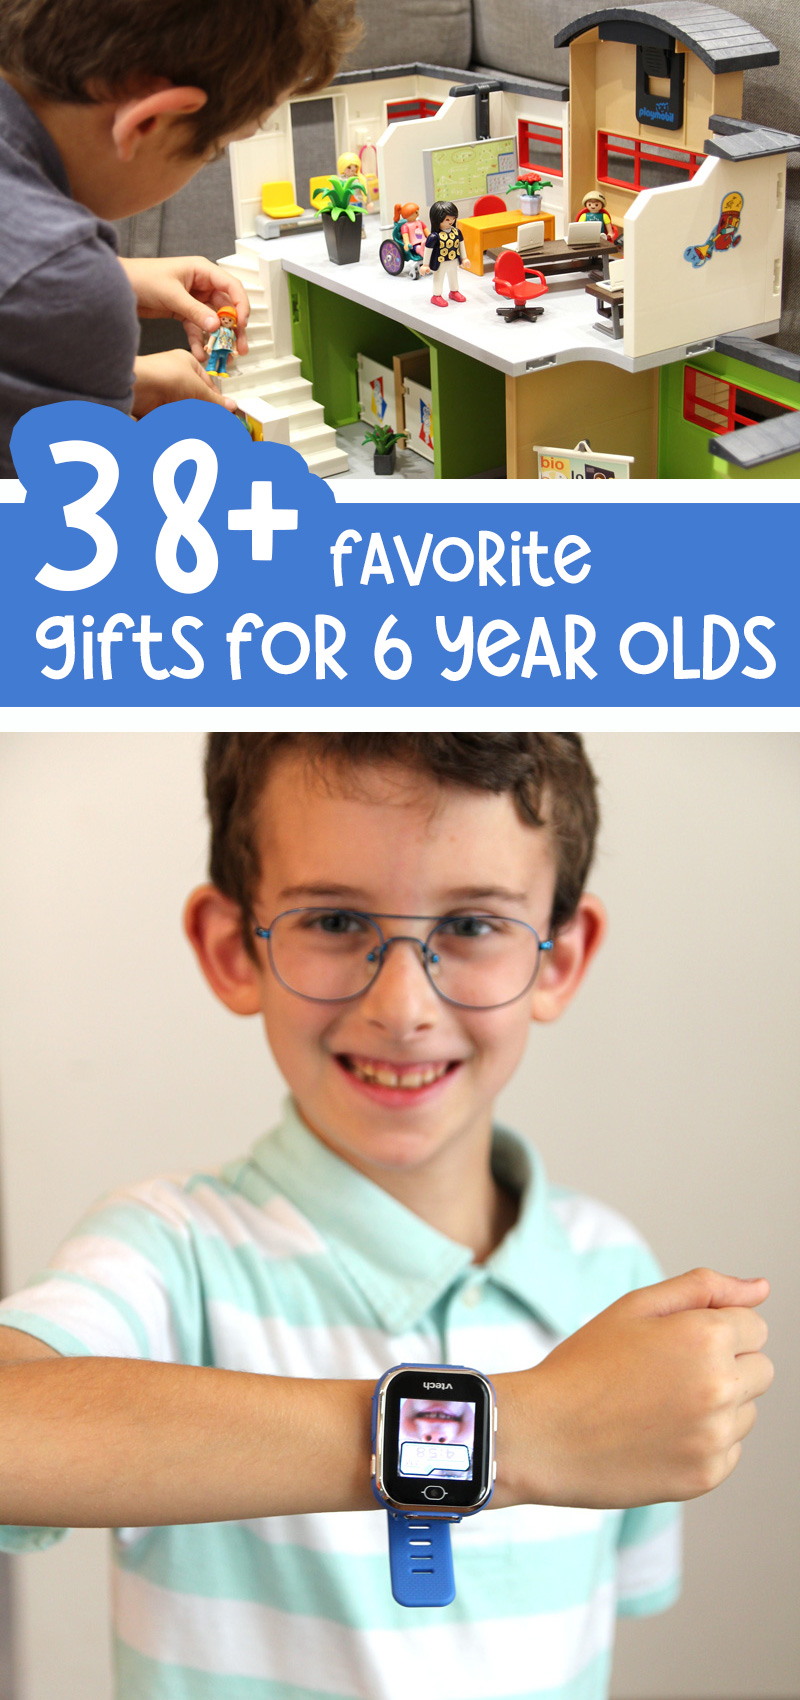 Alternatives to Buying Toys as Birthday Gifts for Kids - Monkey Joe's